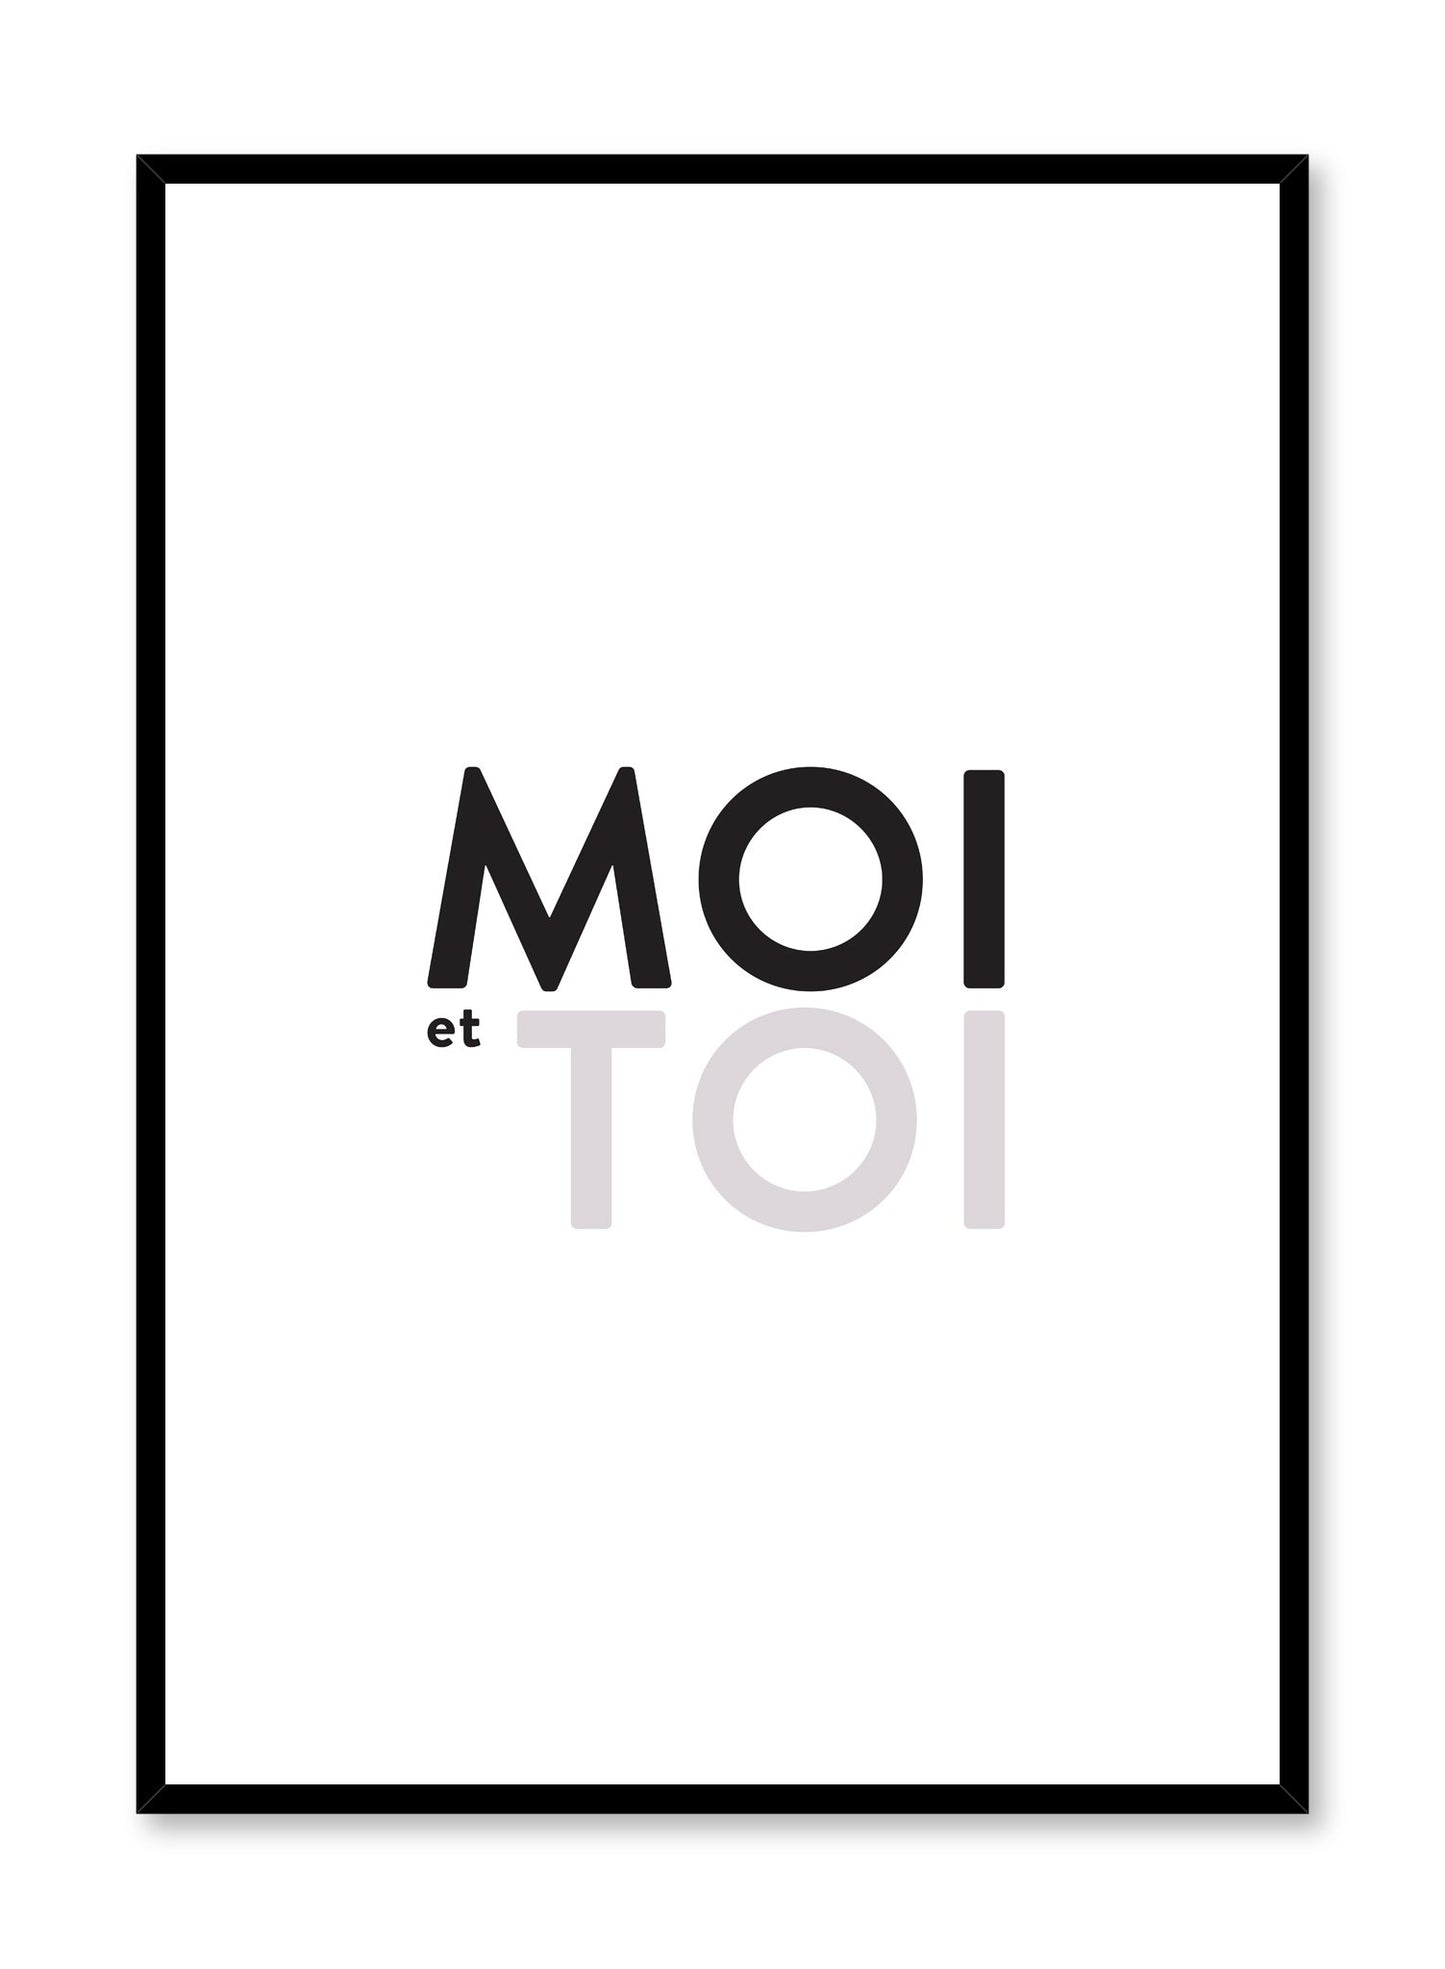 Scandinavian poster with black and white graphic typography design of Moi et toi (me and you) by Opposite Wall